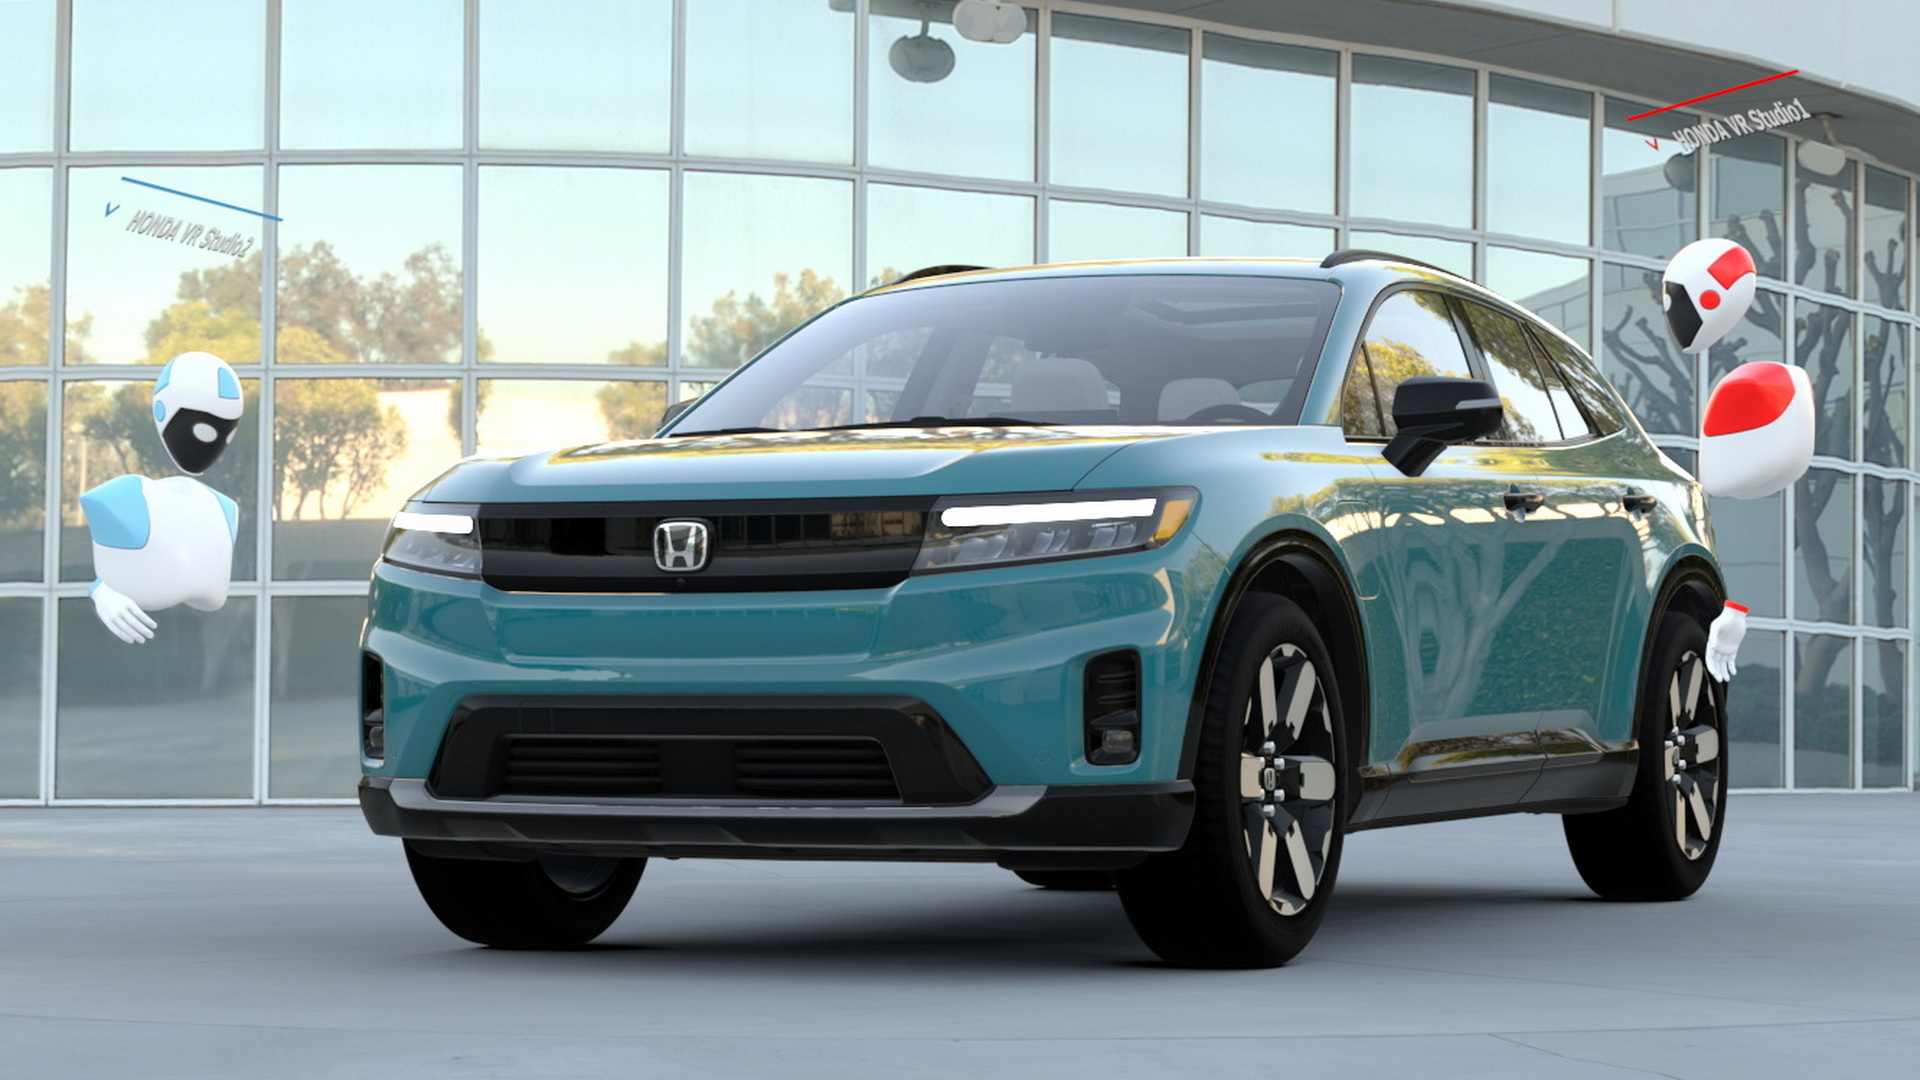 How Honda Is Using VR In Car Design To Develop New Faster Carscoops